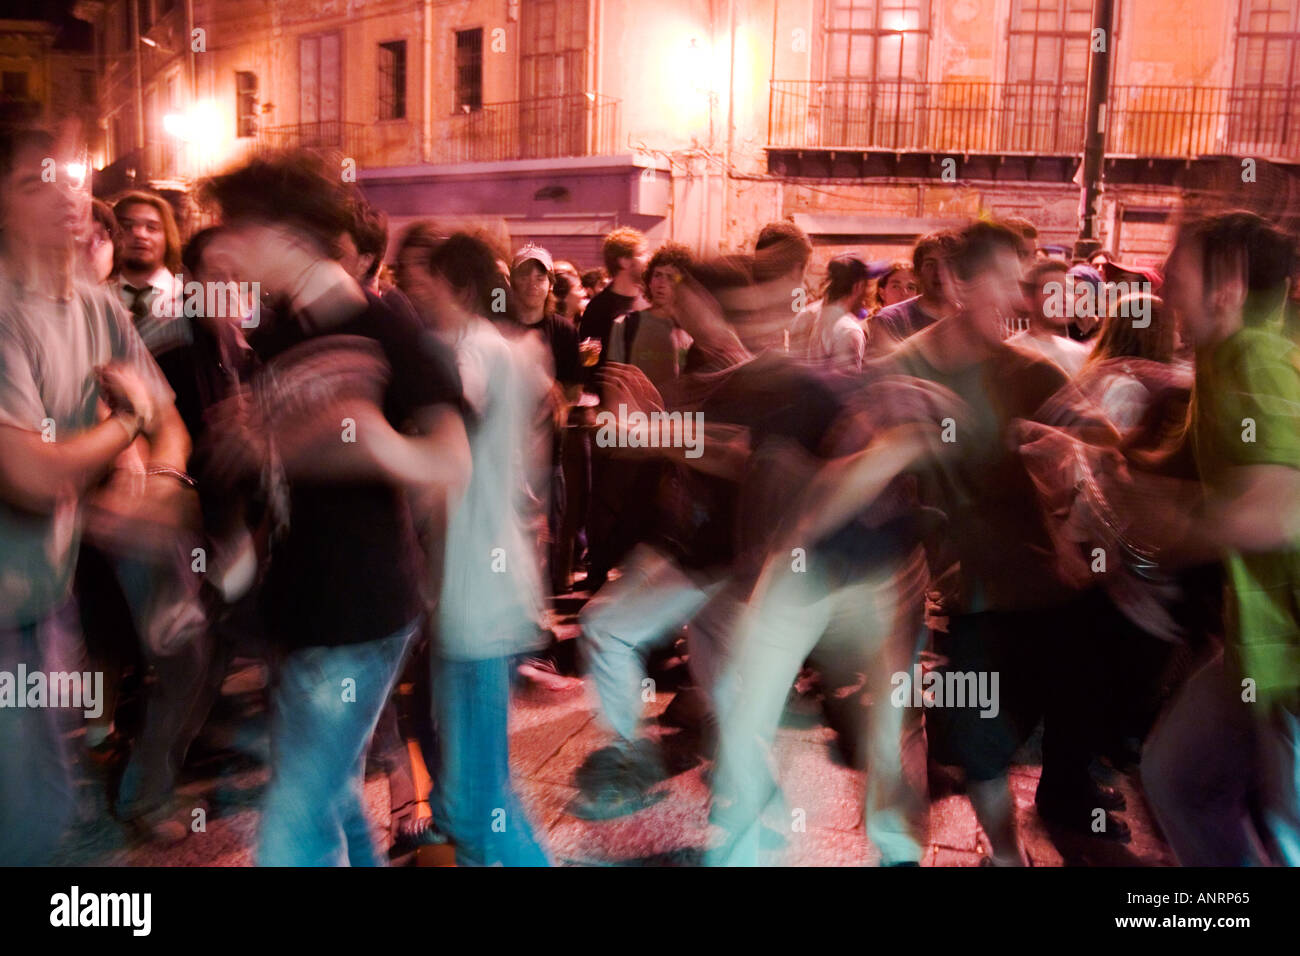 Youth dancing at rock concert Piazza S Anna Palermo Sicily Stock Photo